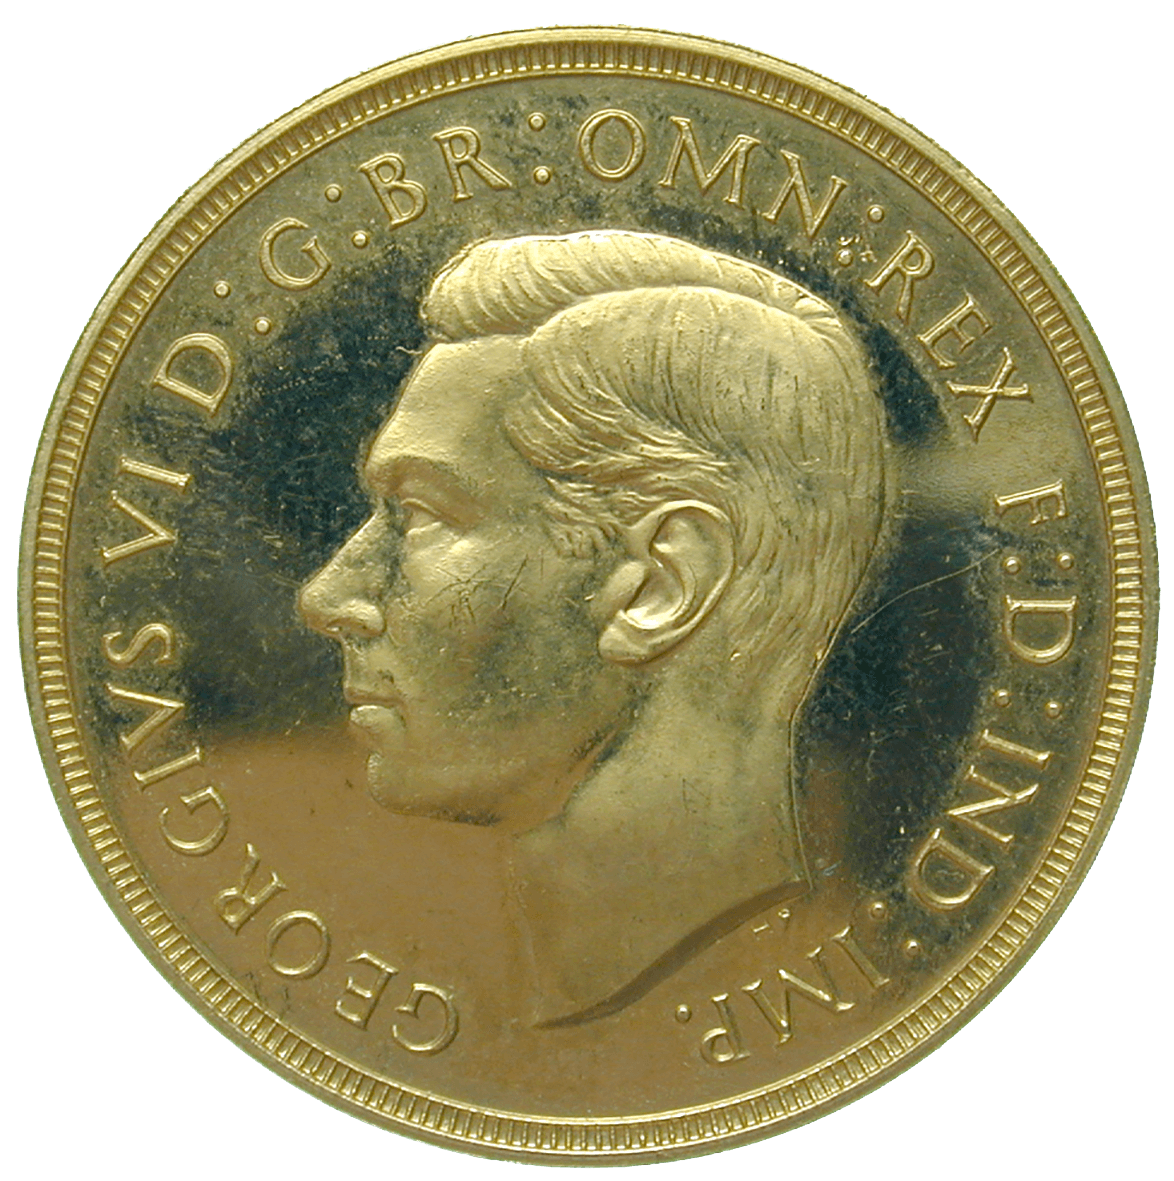 United Kingdom of Great Britain, George VI, 2 Pounds 1937 (obverse)